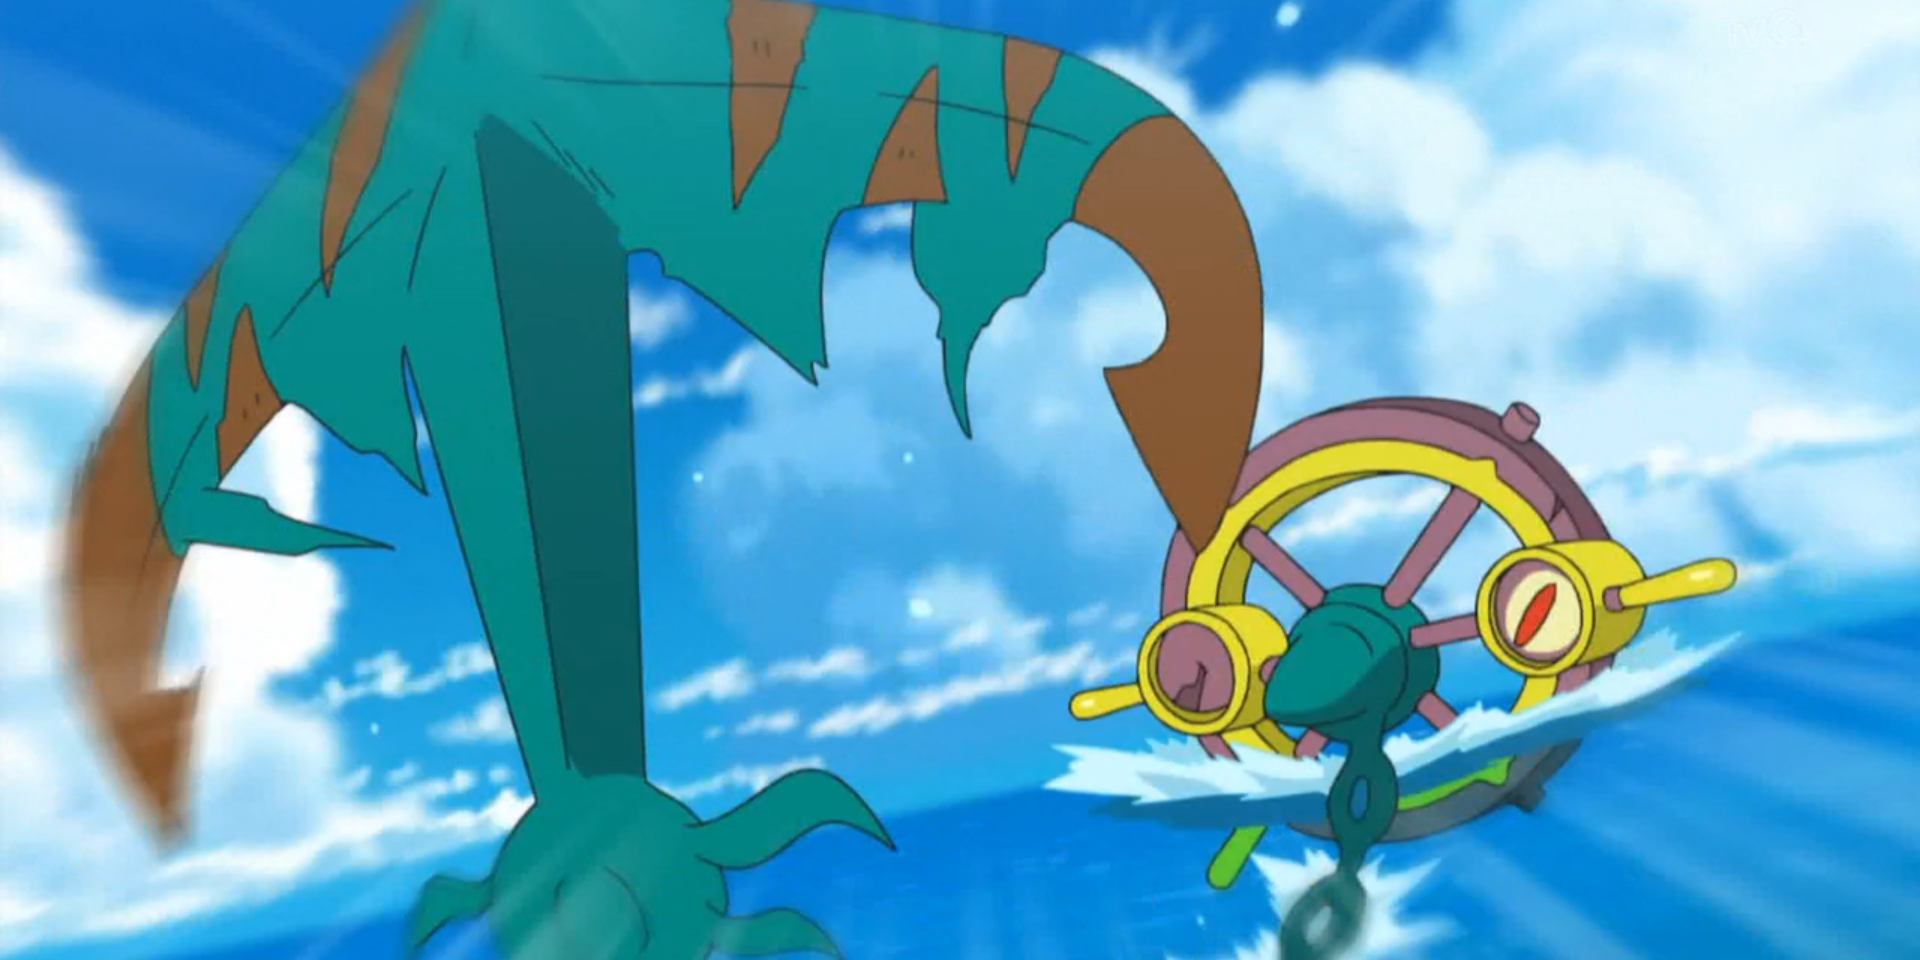 Dhelmise floats in blue water from the Pokemon series